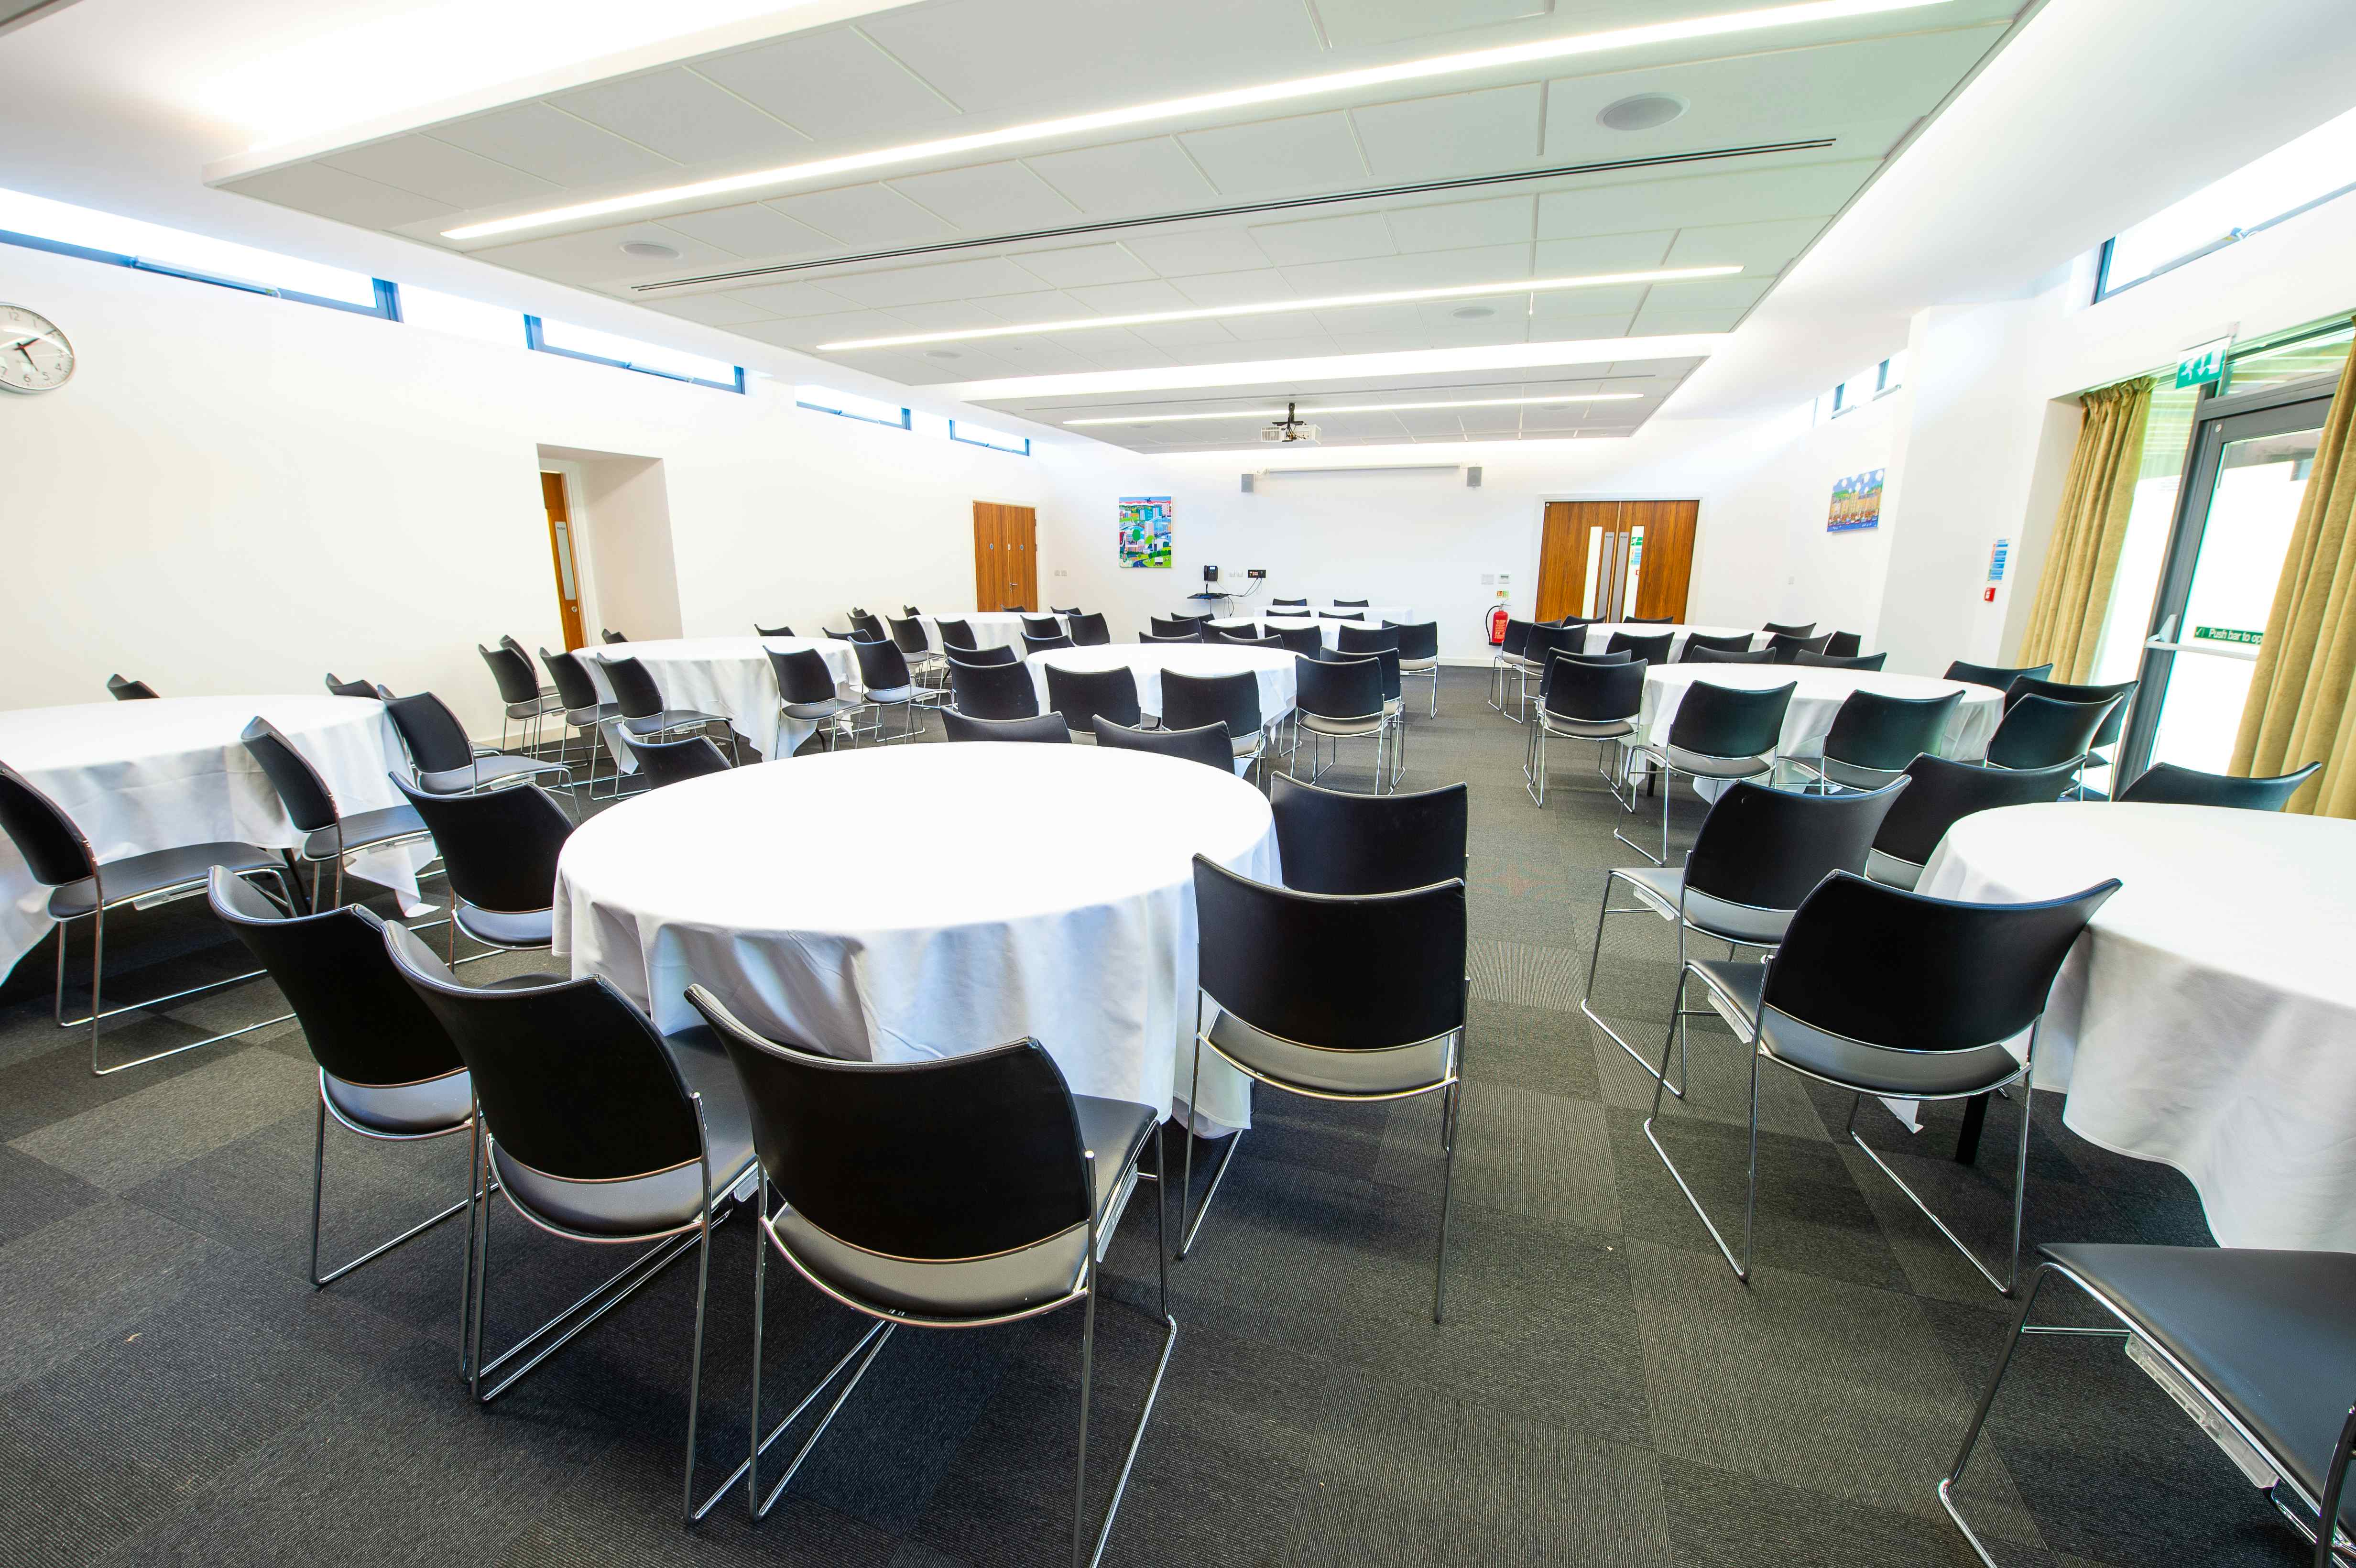 Private Dining Room, Lancaster University Conferences and Events+